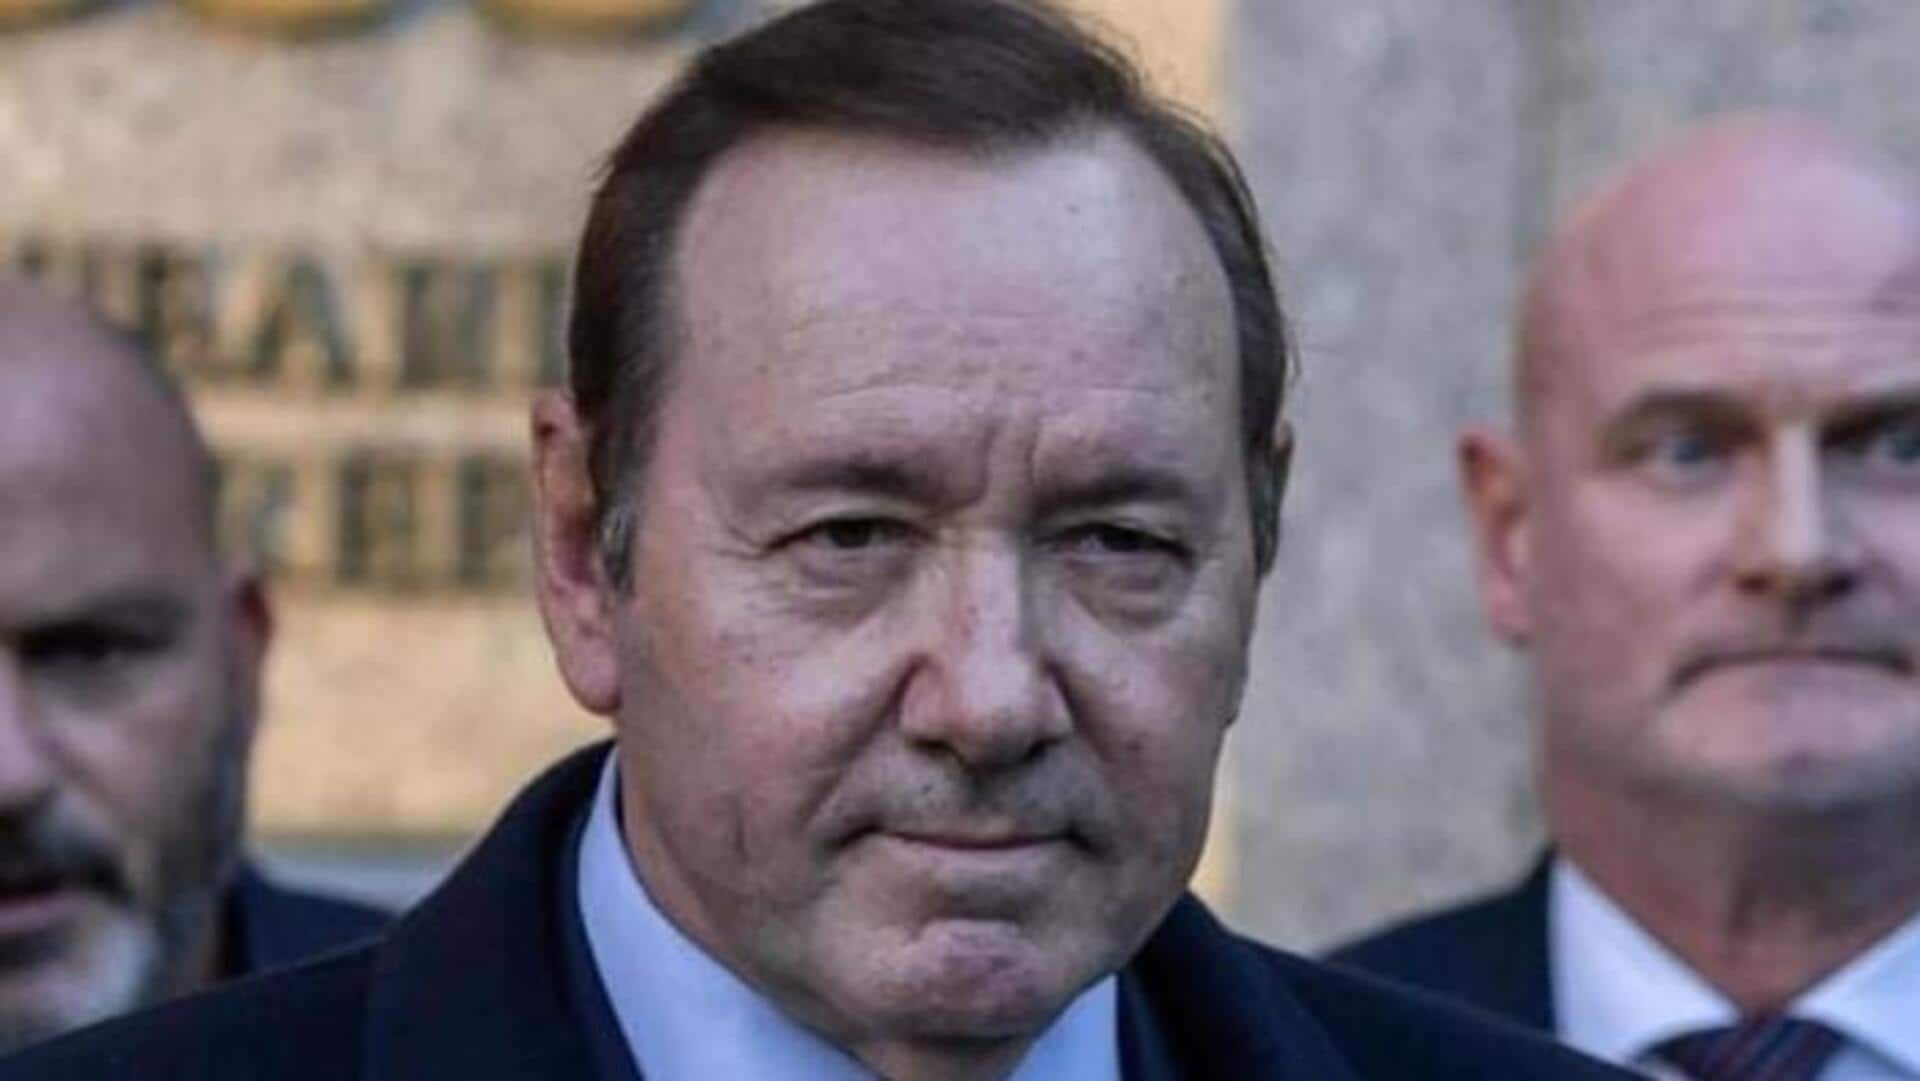 Acquitted of sexual-assault charges, Kevin Spacey hopeful to revive career